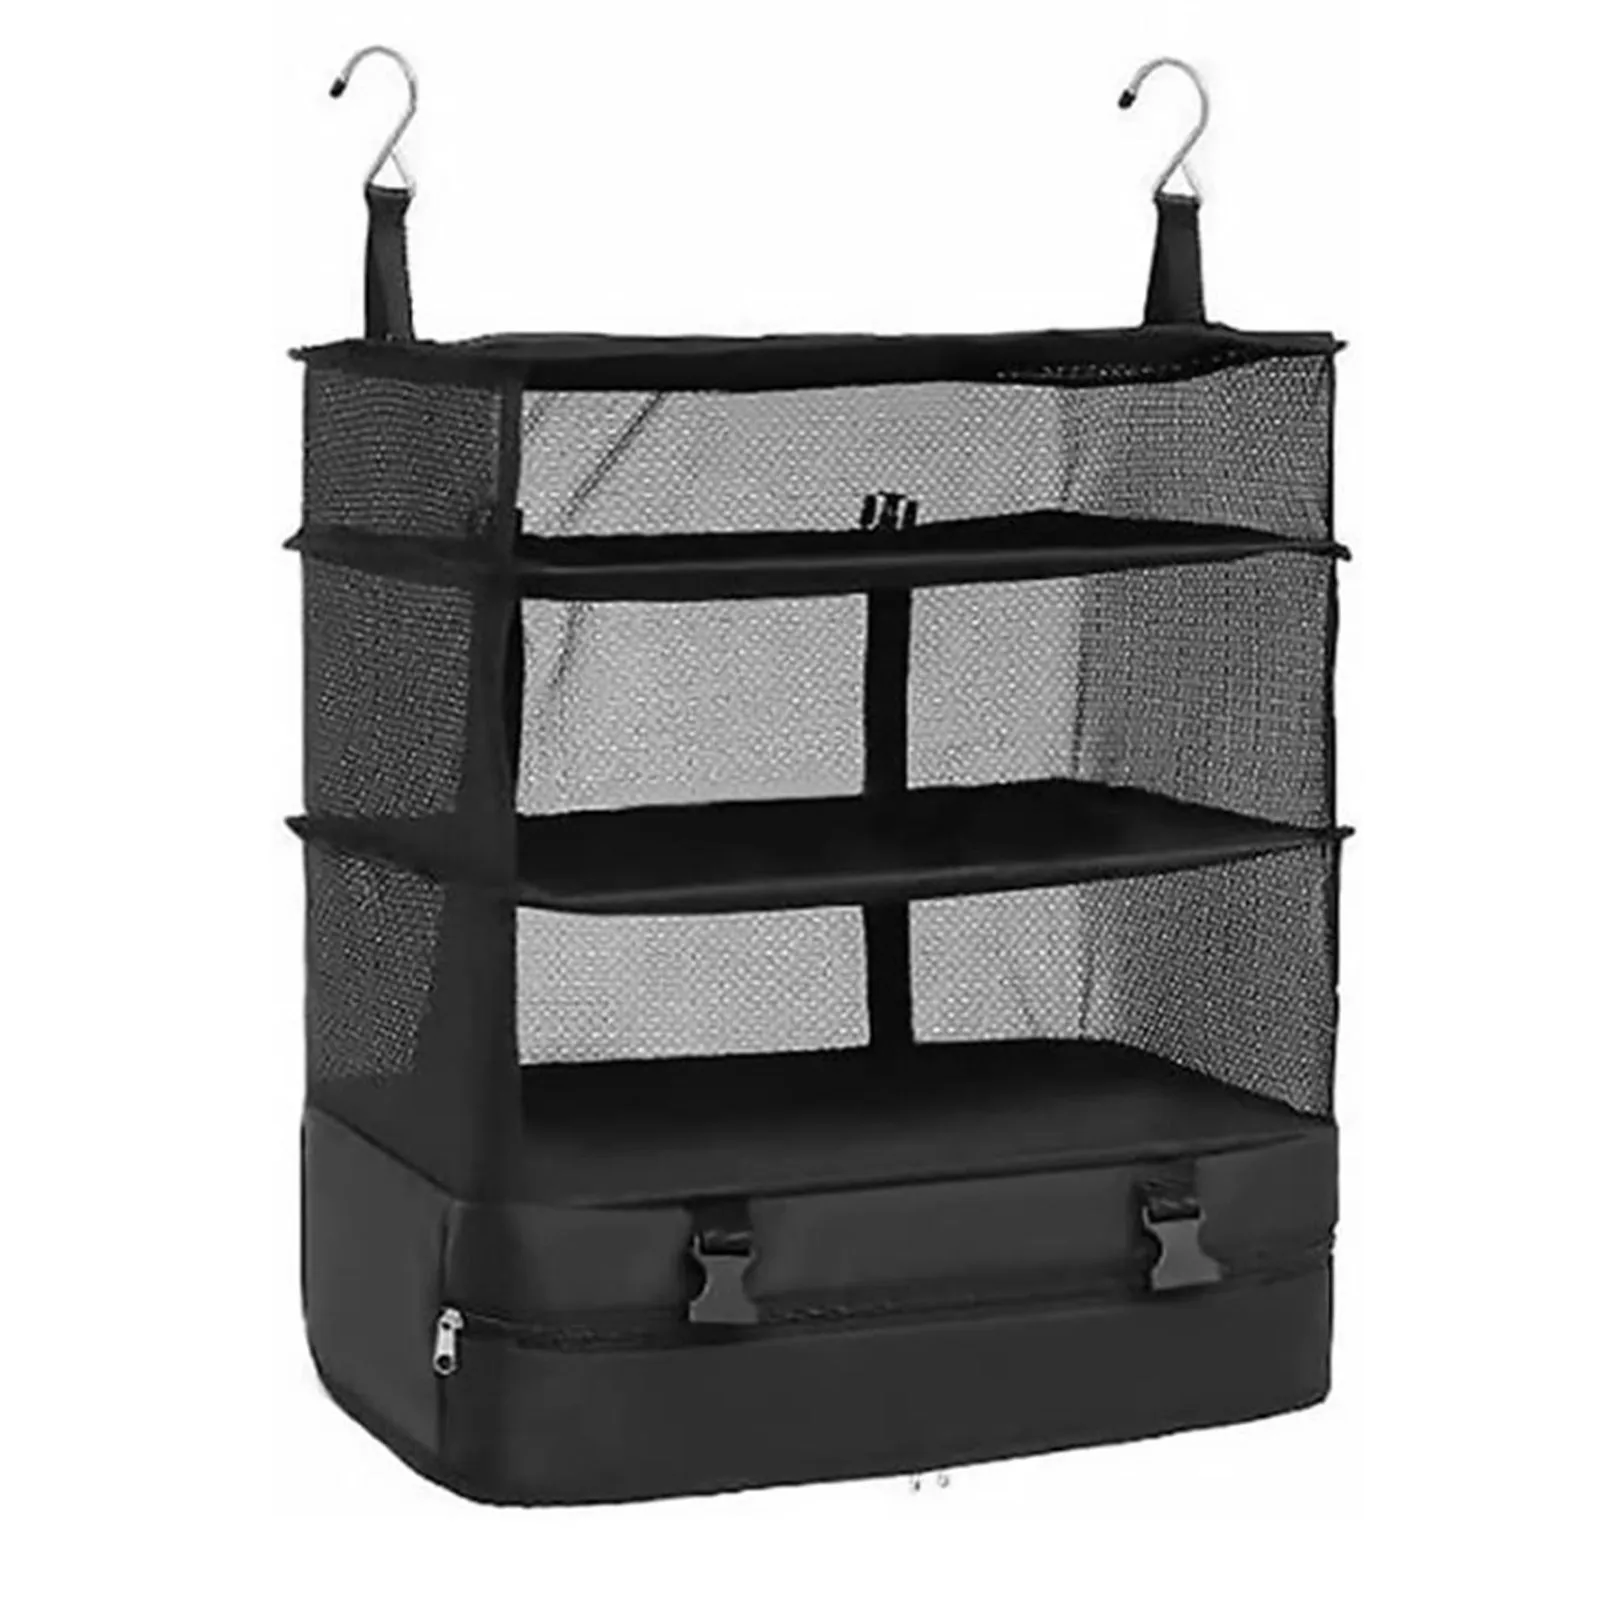 

Hanging Travel Shelves Bag 3-Shelf Polyester And Mesh Hanging Luggage Organizer For Carry-on Luggage Travel Space Saver